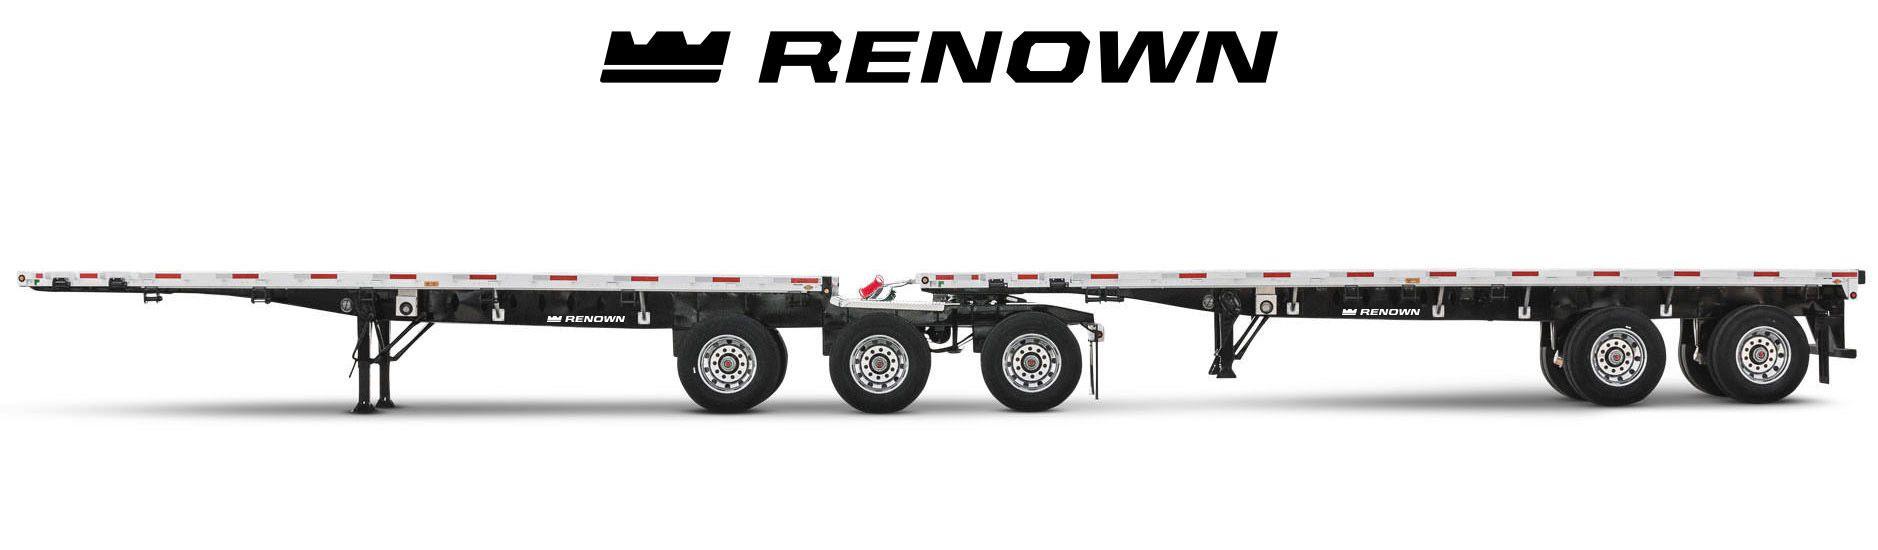 Flatbed Logo - Premier manufacturer of flatbeds, hopper trailers, and heavy haul